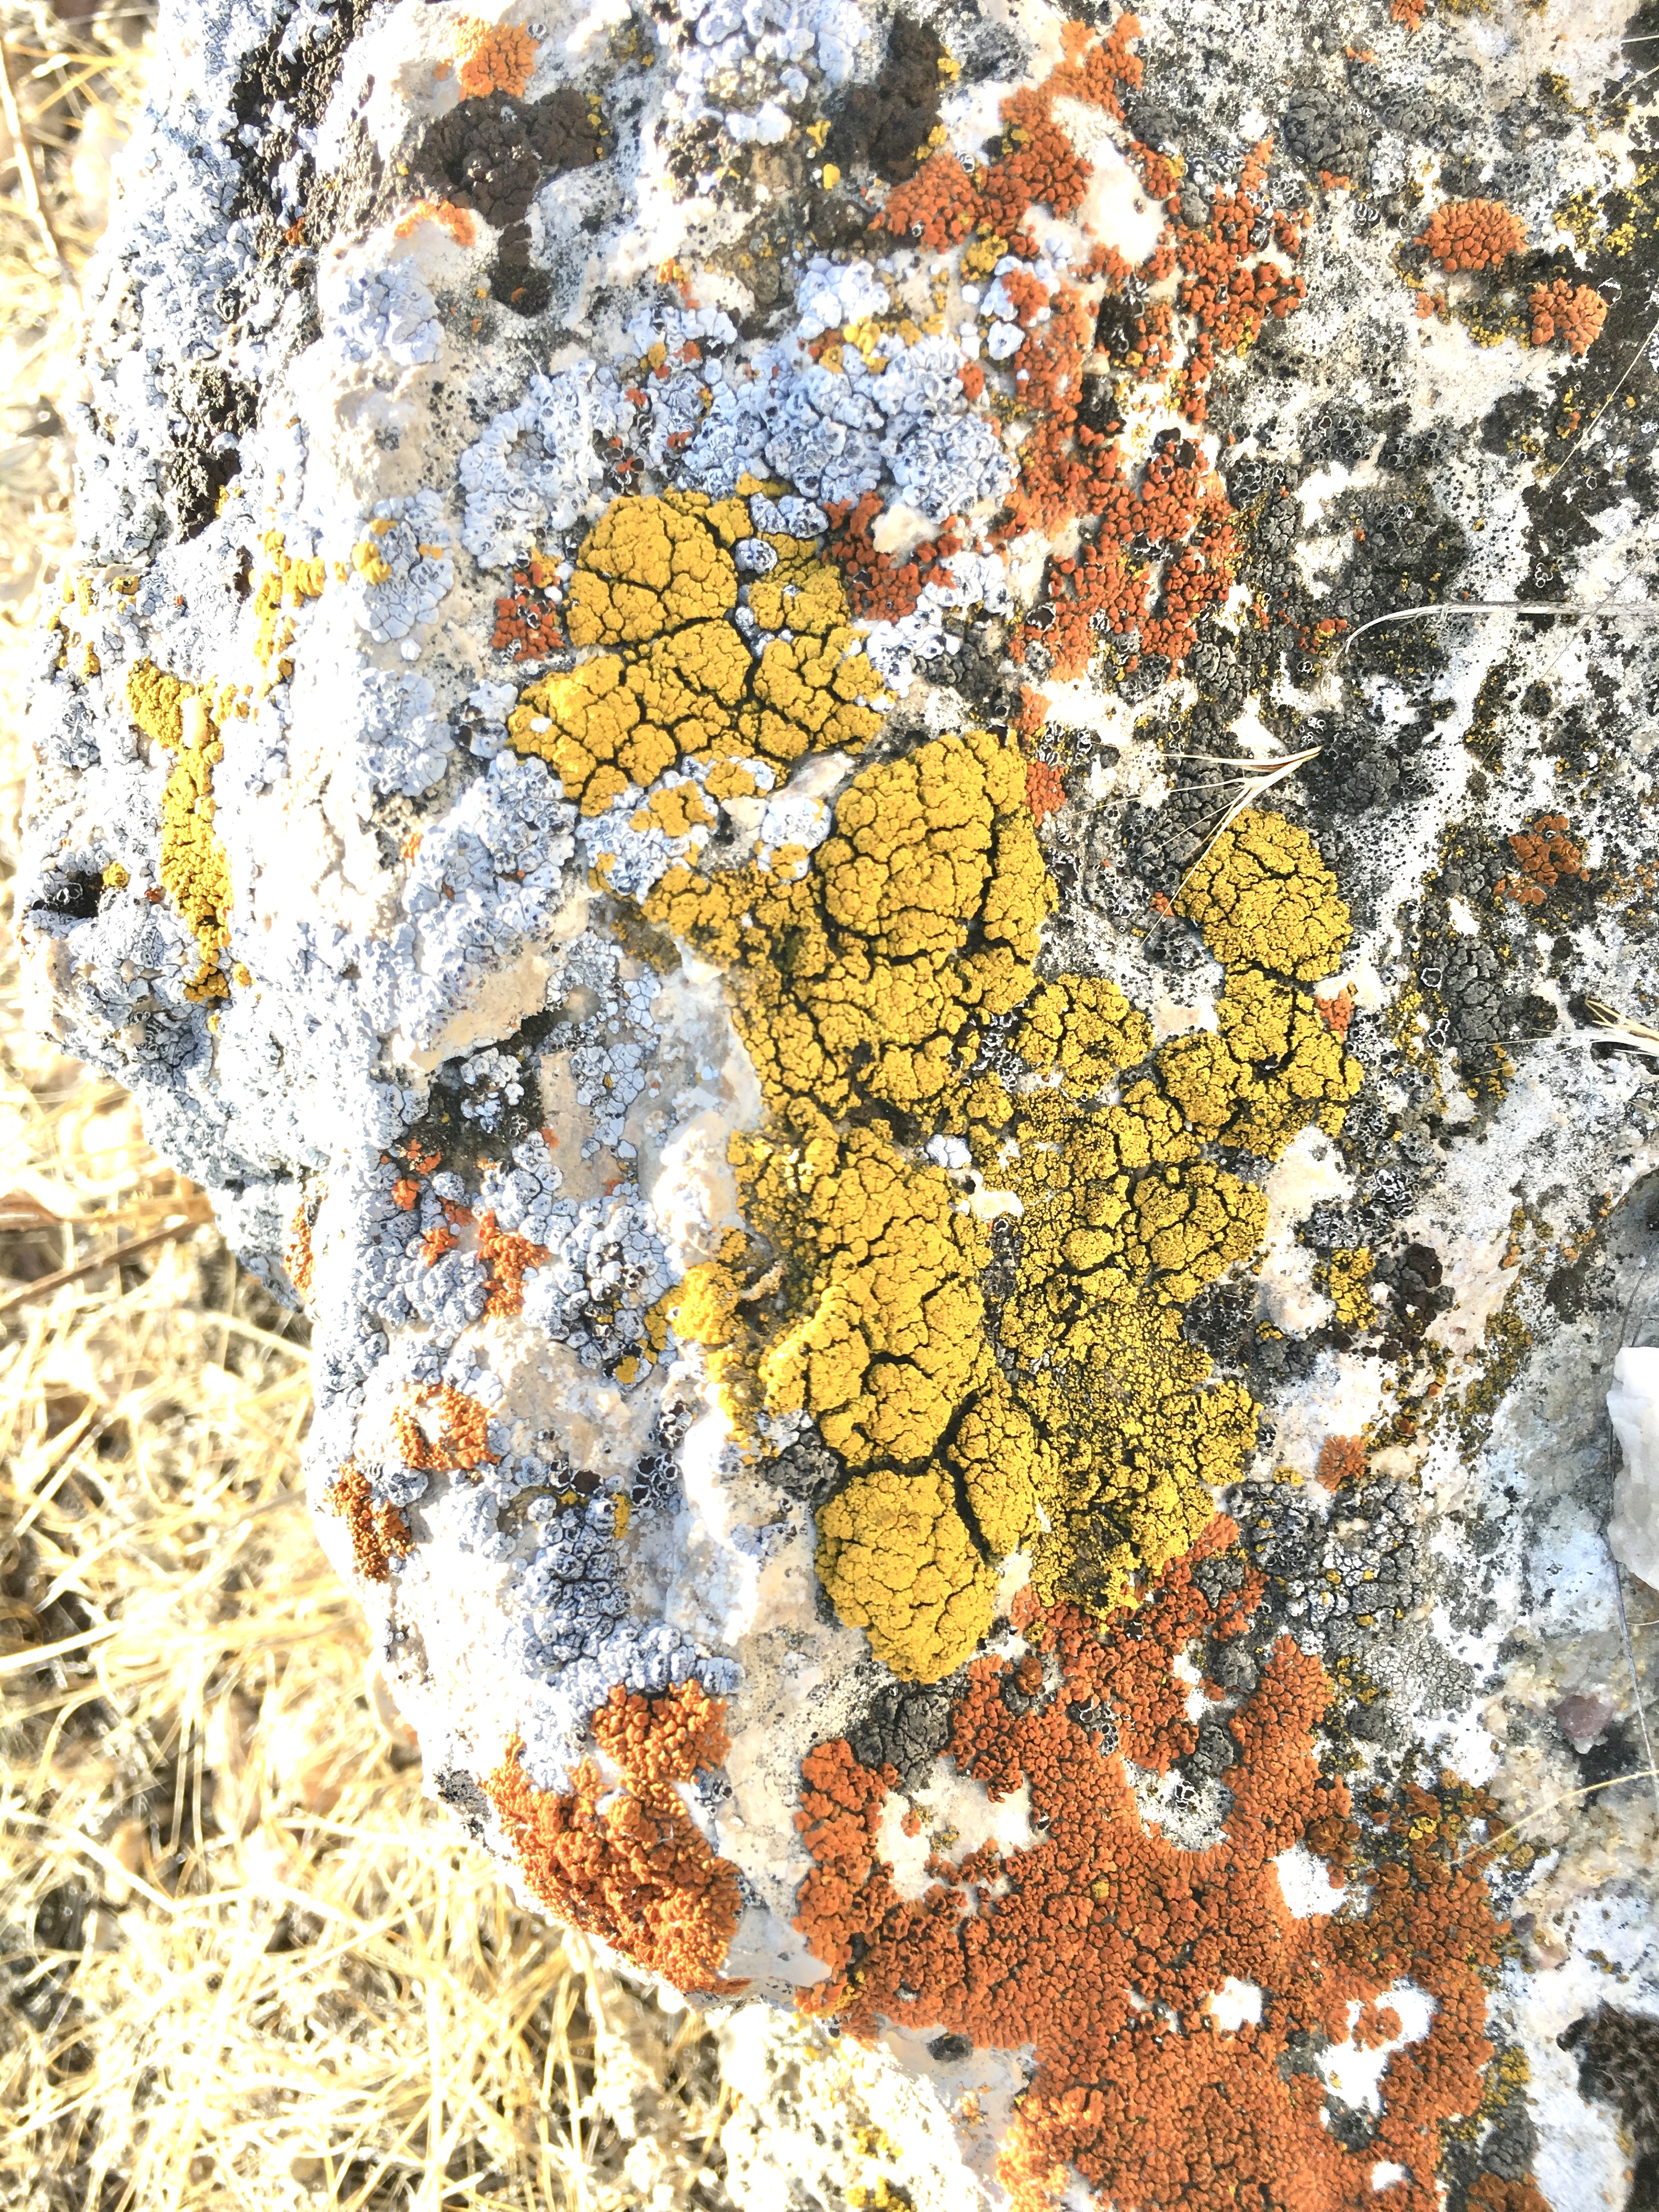 Gray rock with bright yellow, orange, and gray lichens growing on it.